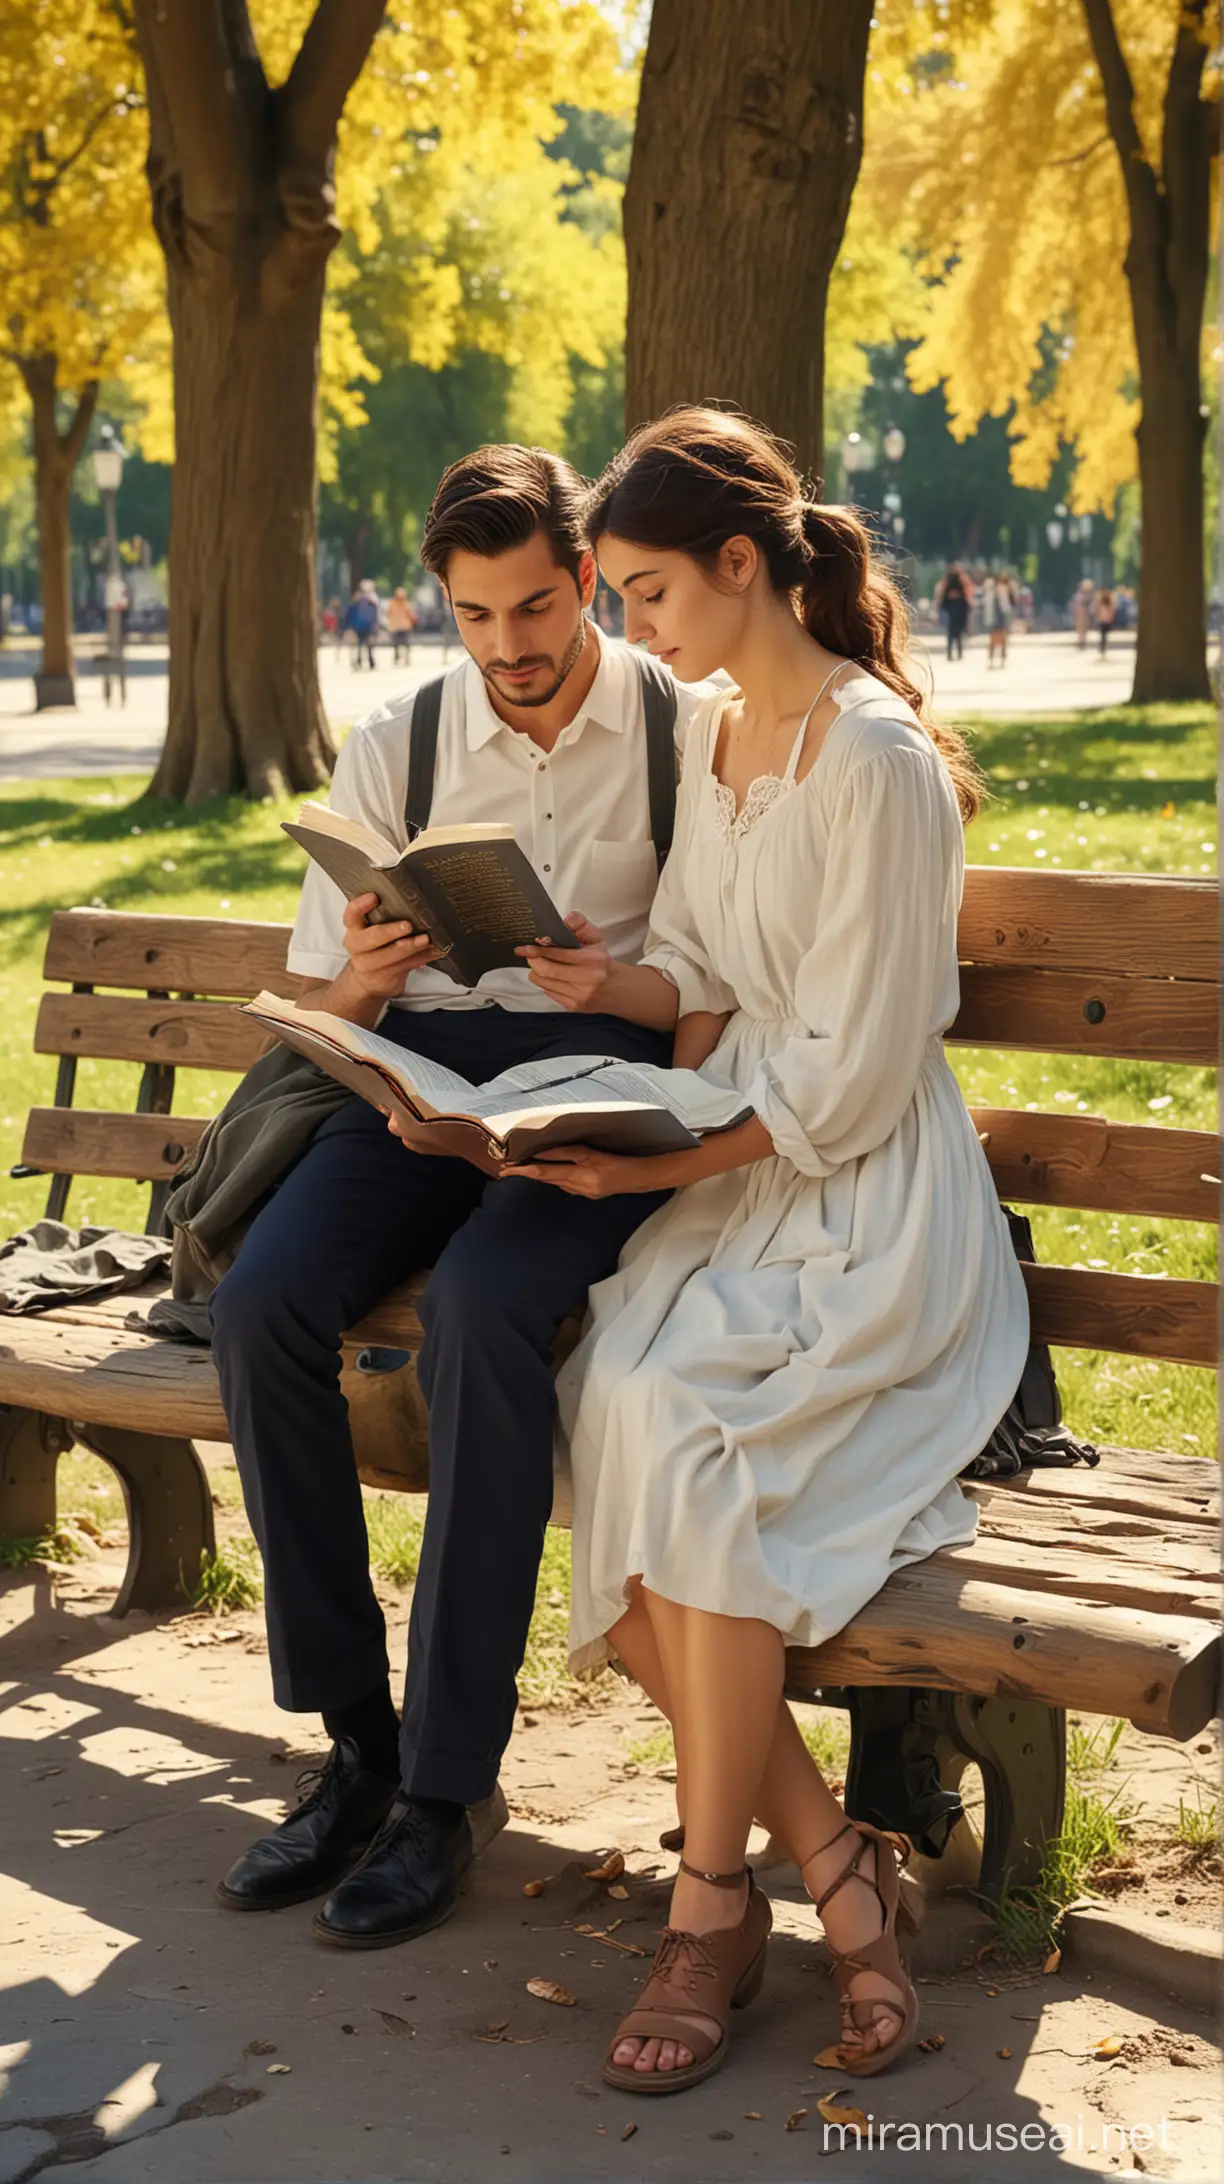 Italian Couple Reading Bible in Bustling Park on Sunny Day